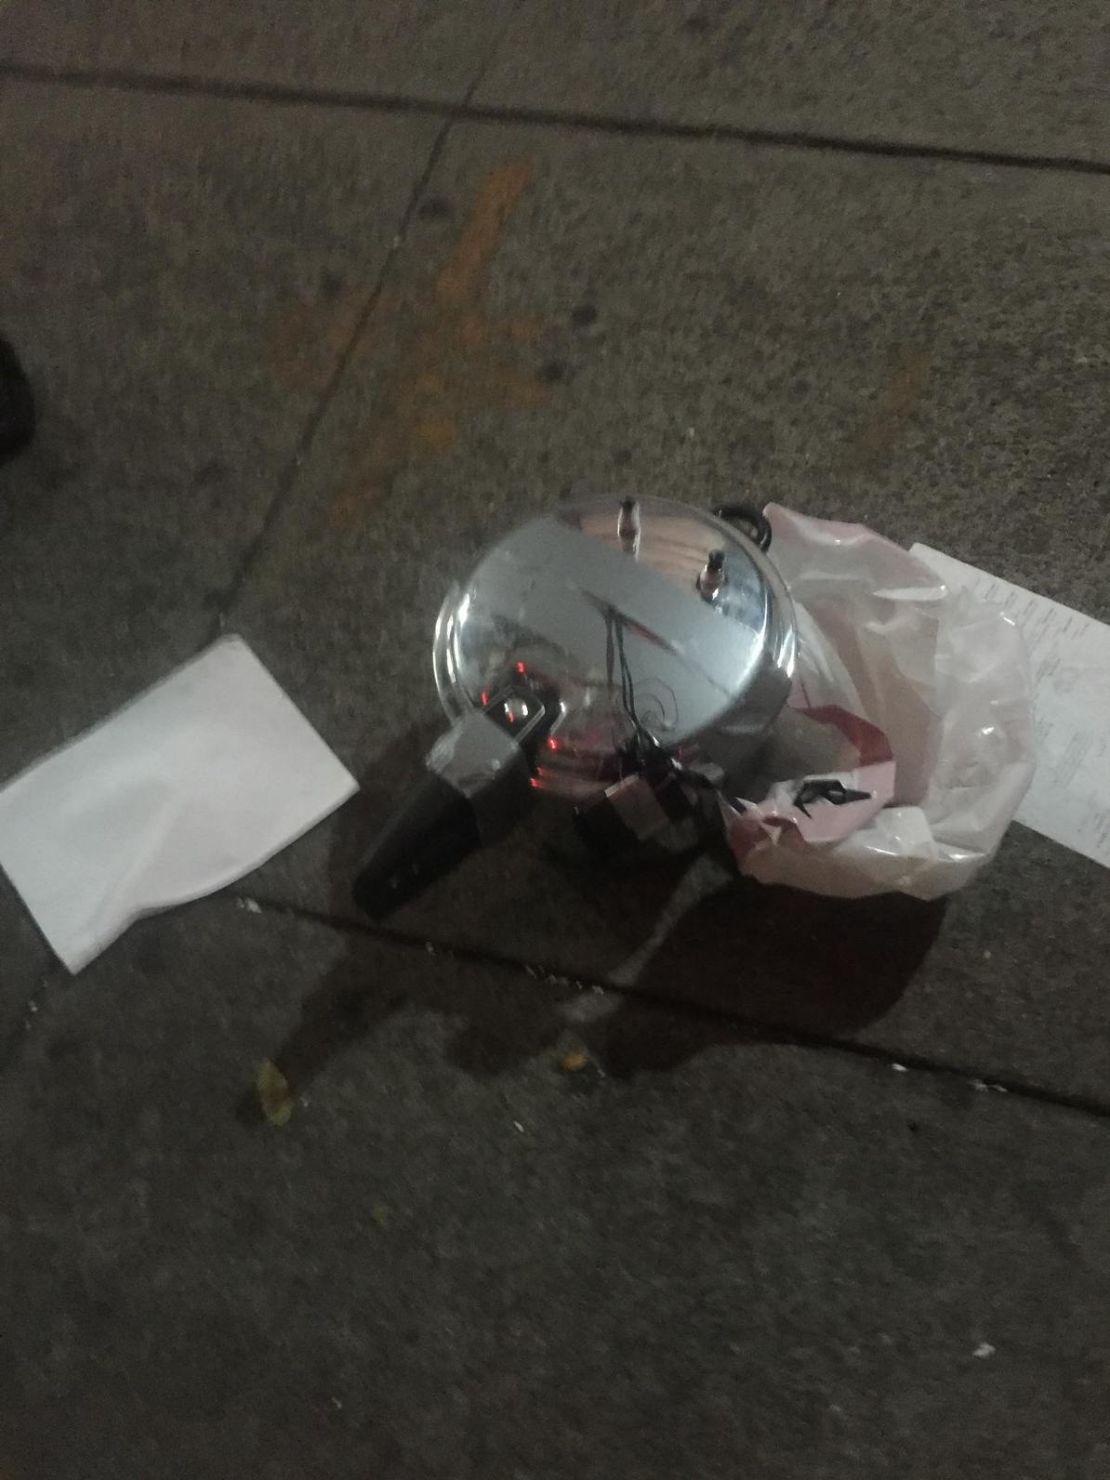 A device at a second location in Chelsea appears to be a pressure cooker.